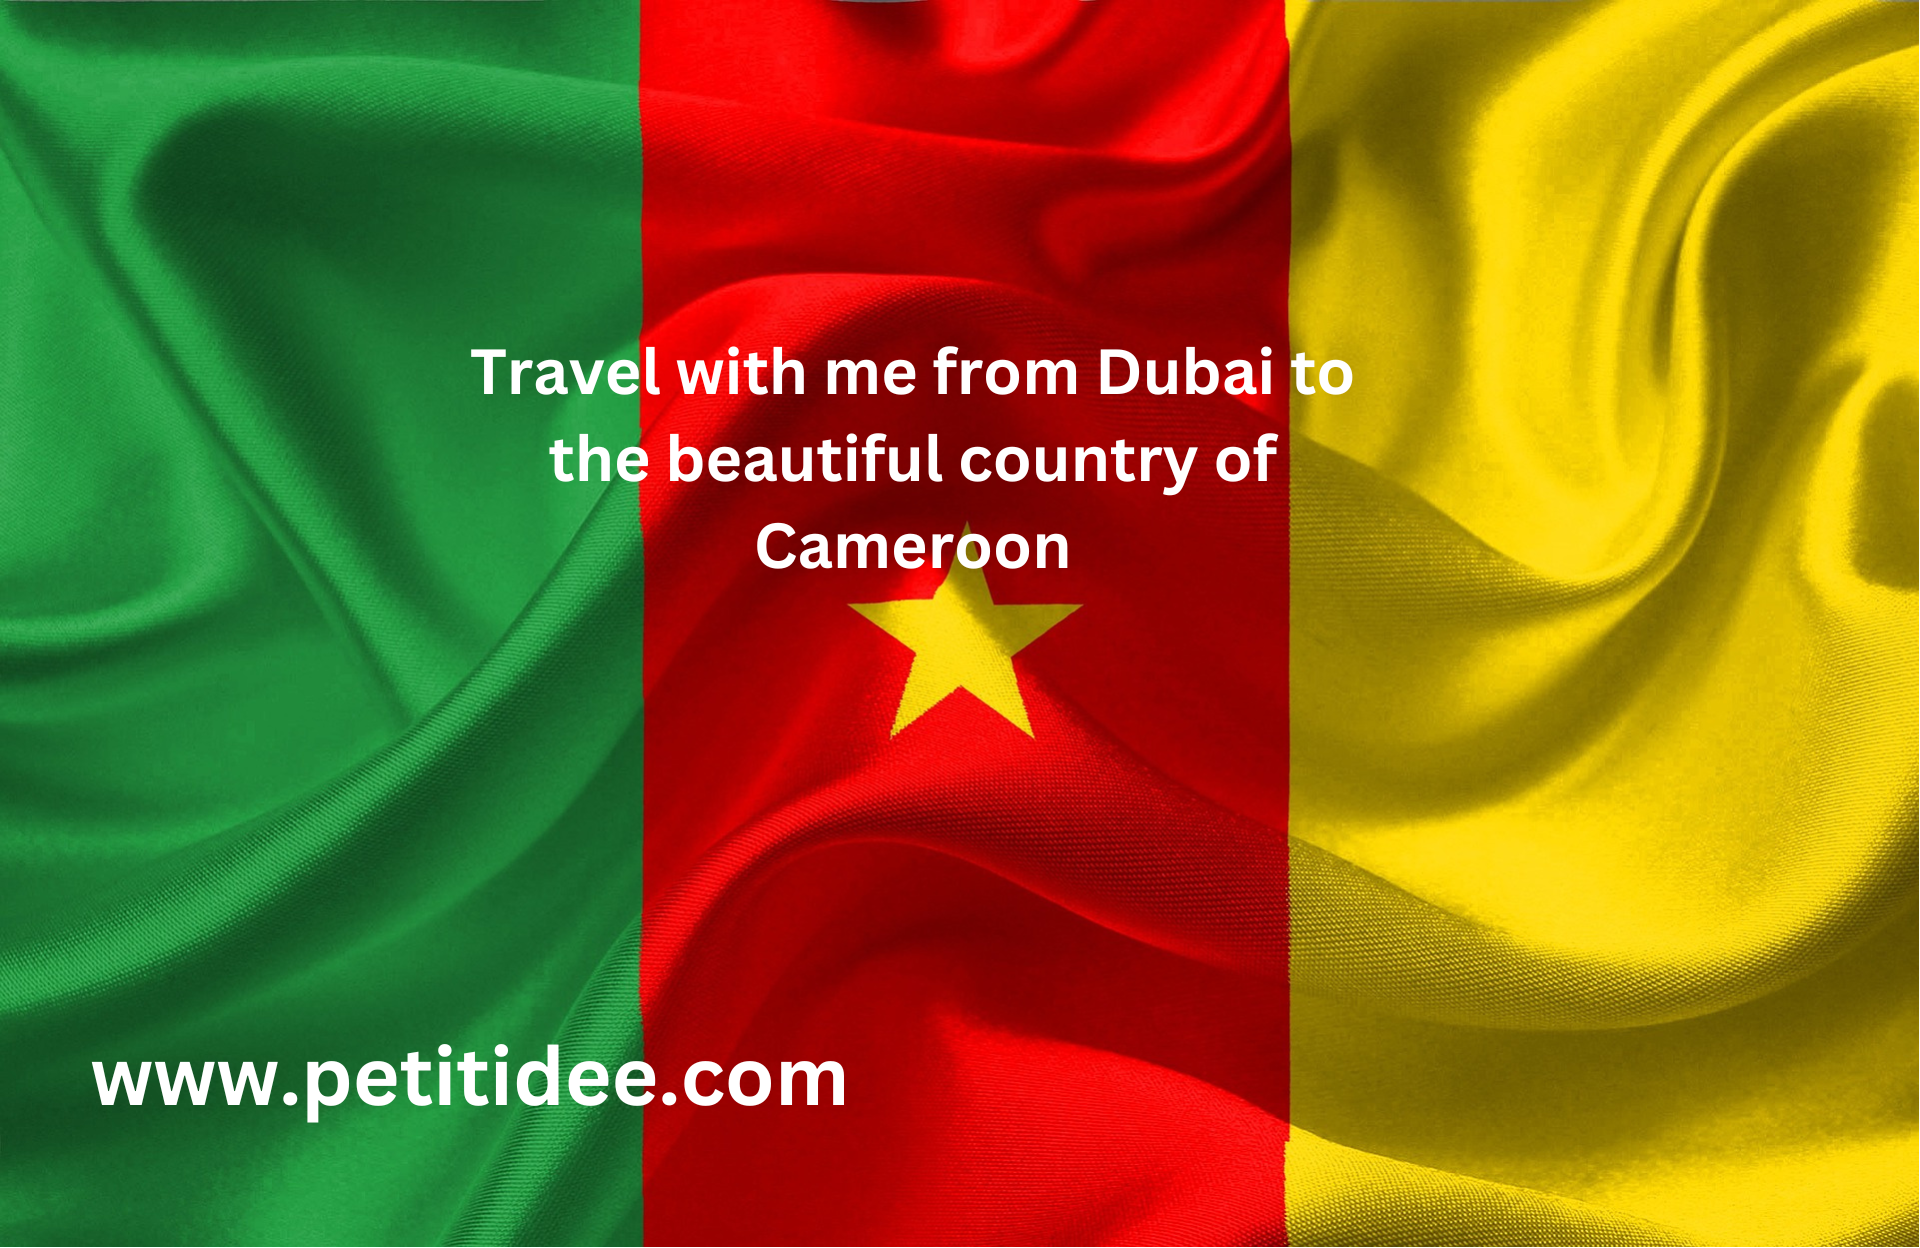 Travel with me from Dubai to the beautiful country of Cameroon